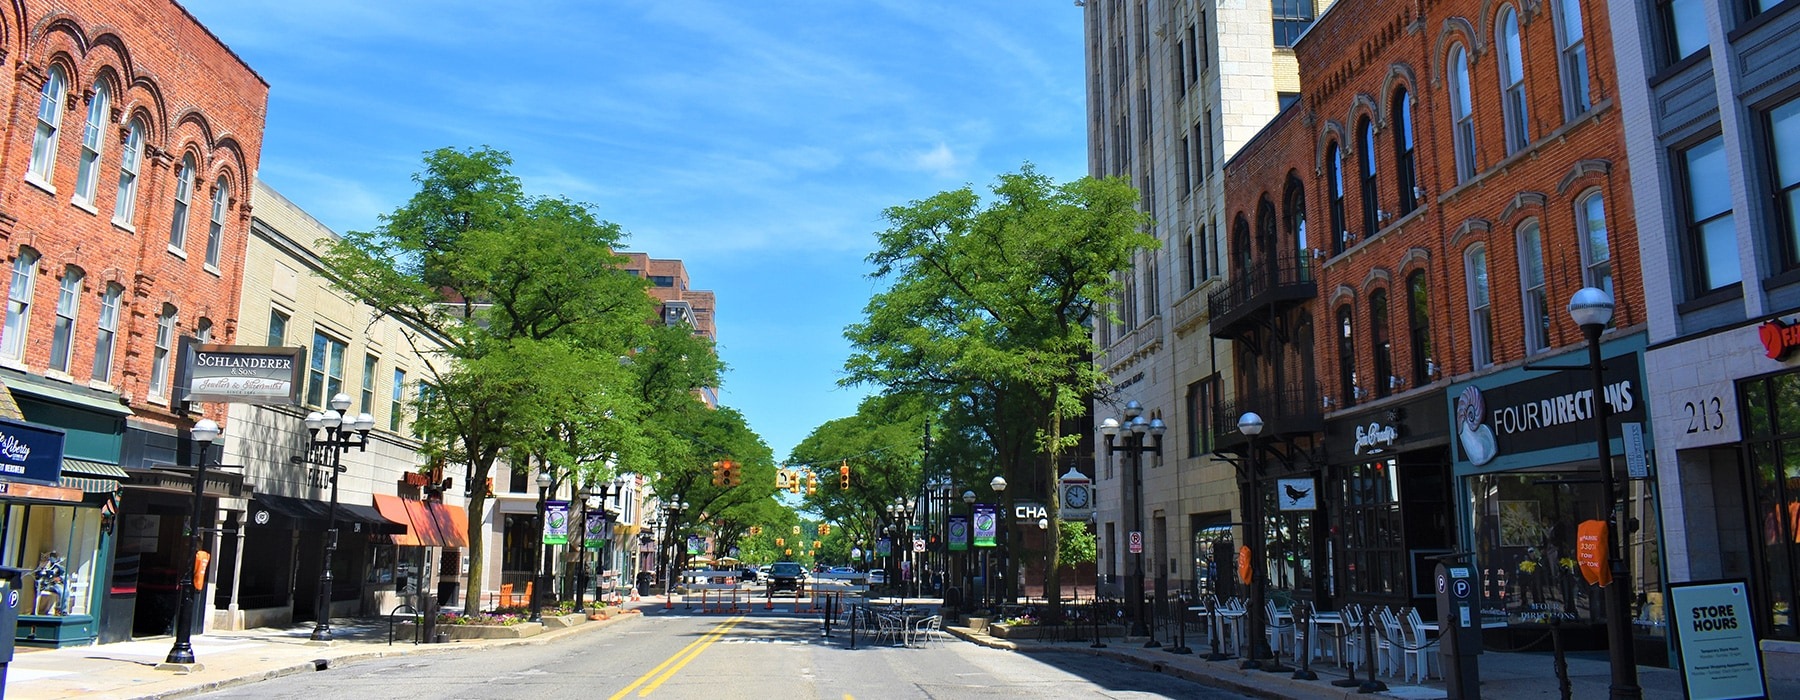 view of wide streets with spacious retail environments